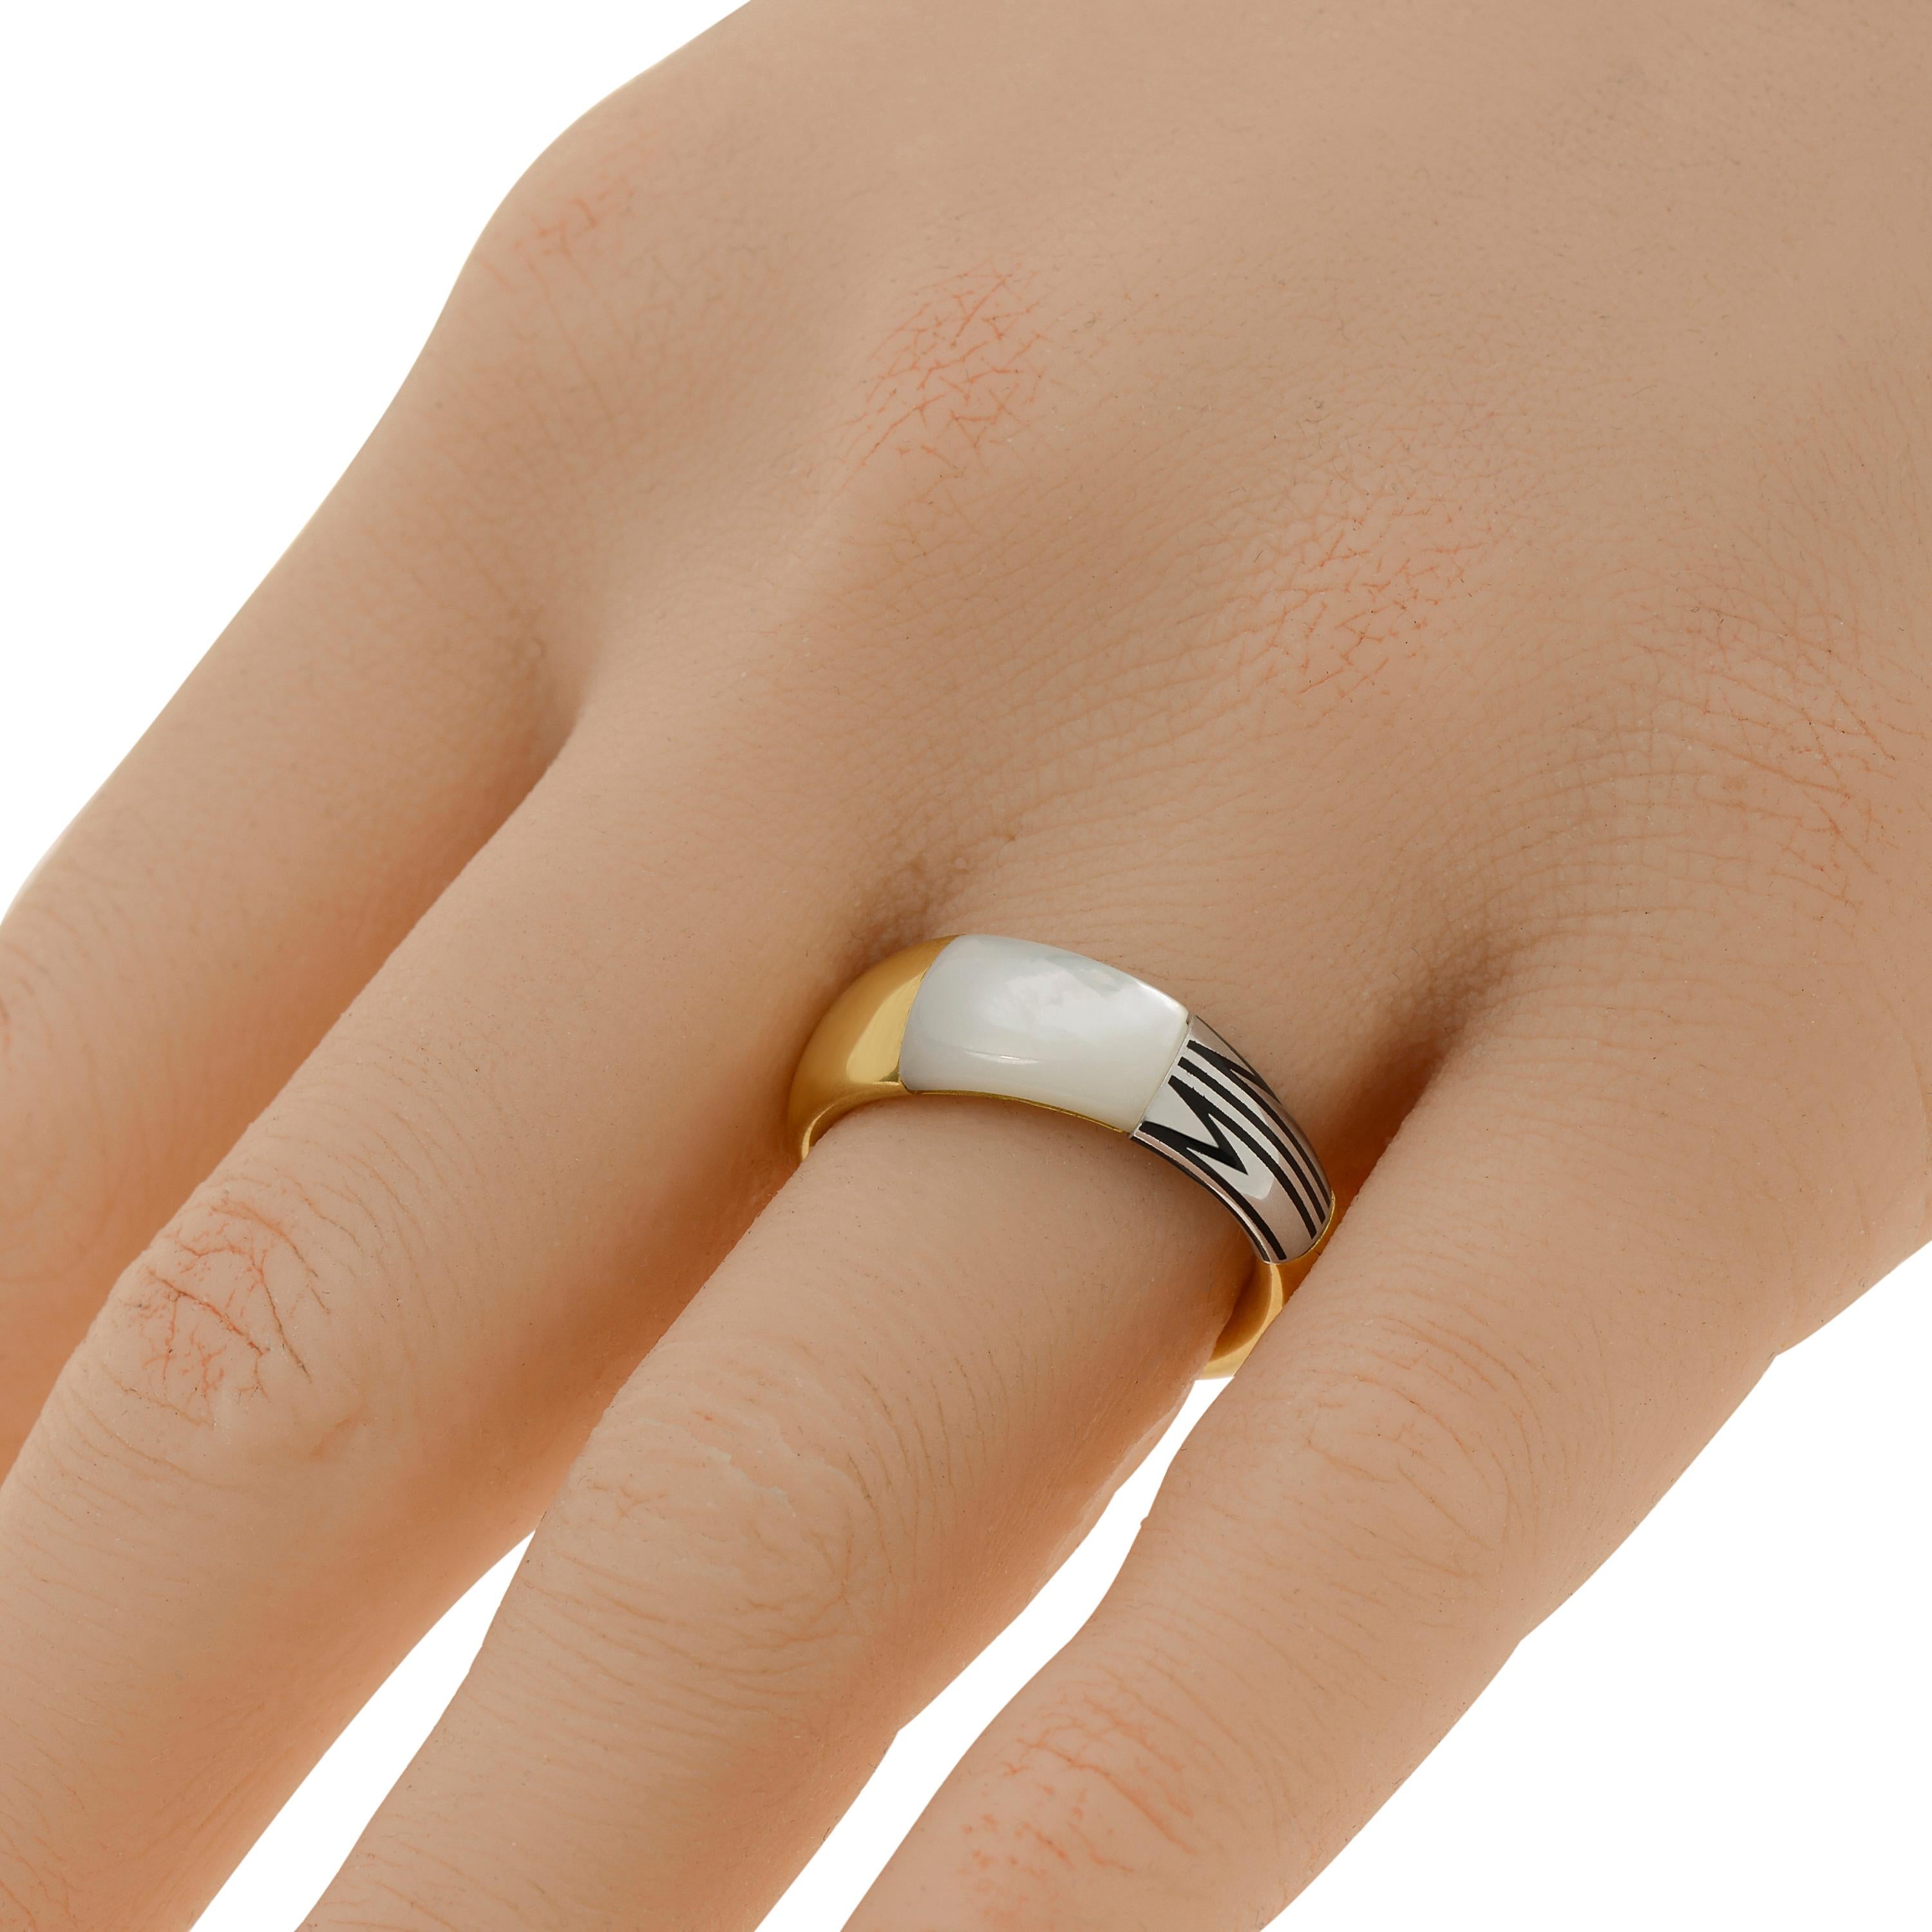 Mimi Milano 18K yellow gold and 18K white gold band ring features an elegant combination on 18K Yellow and white gold and Mother of pearl with letter 